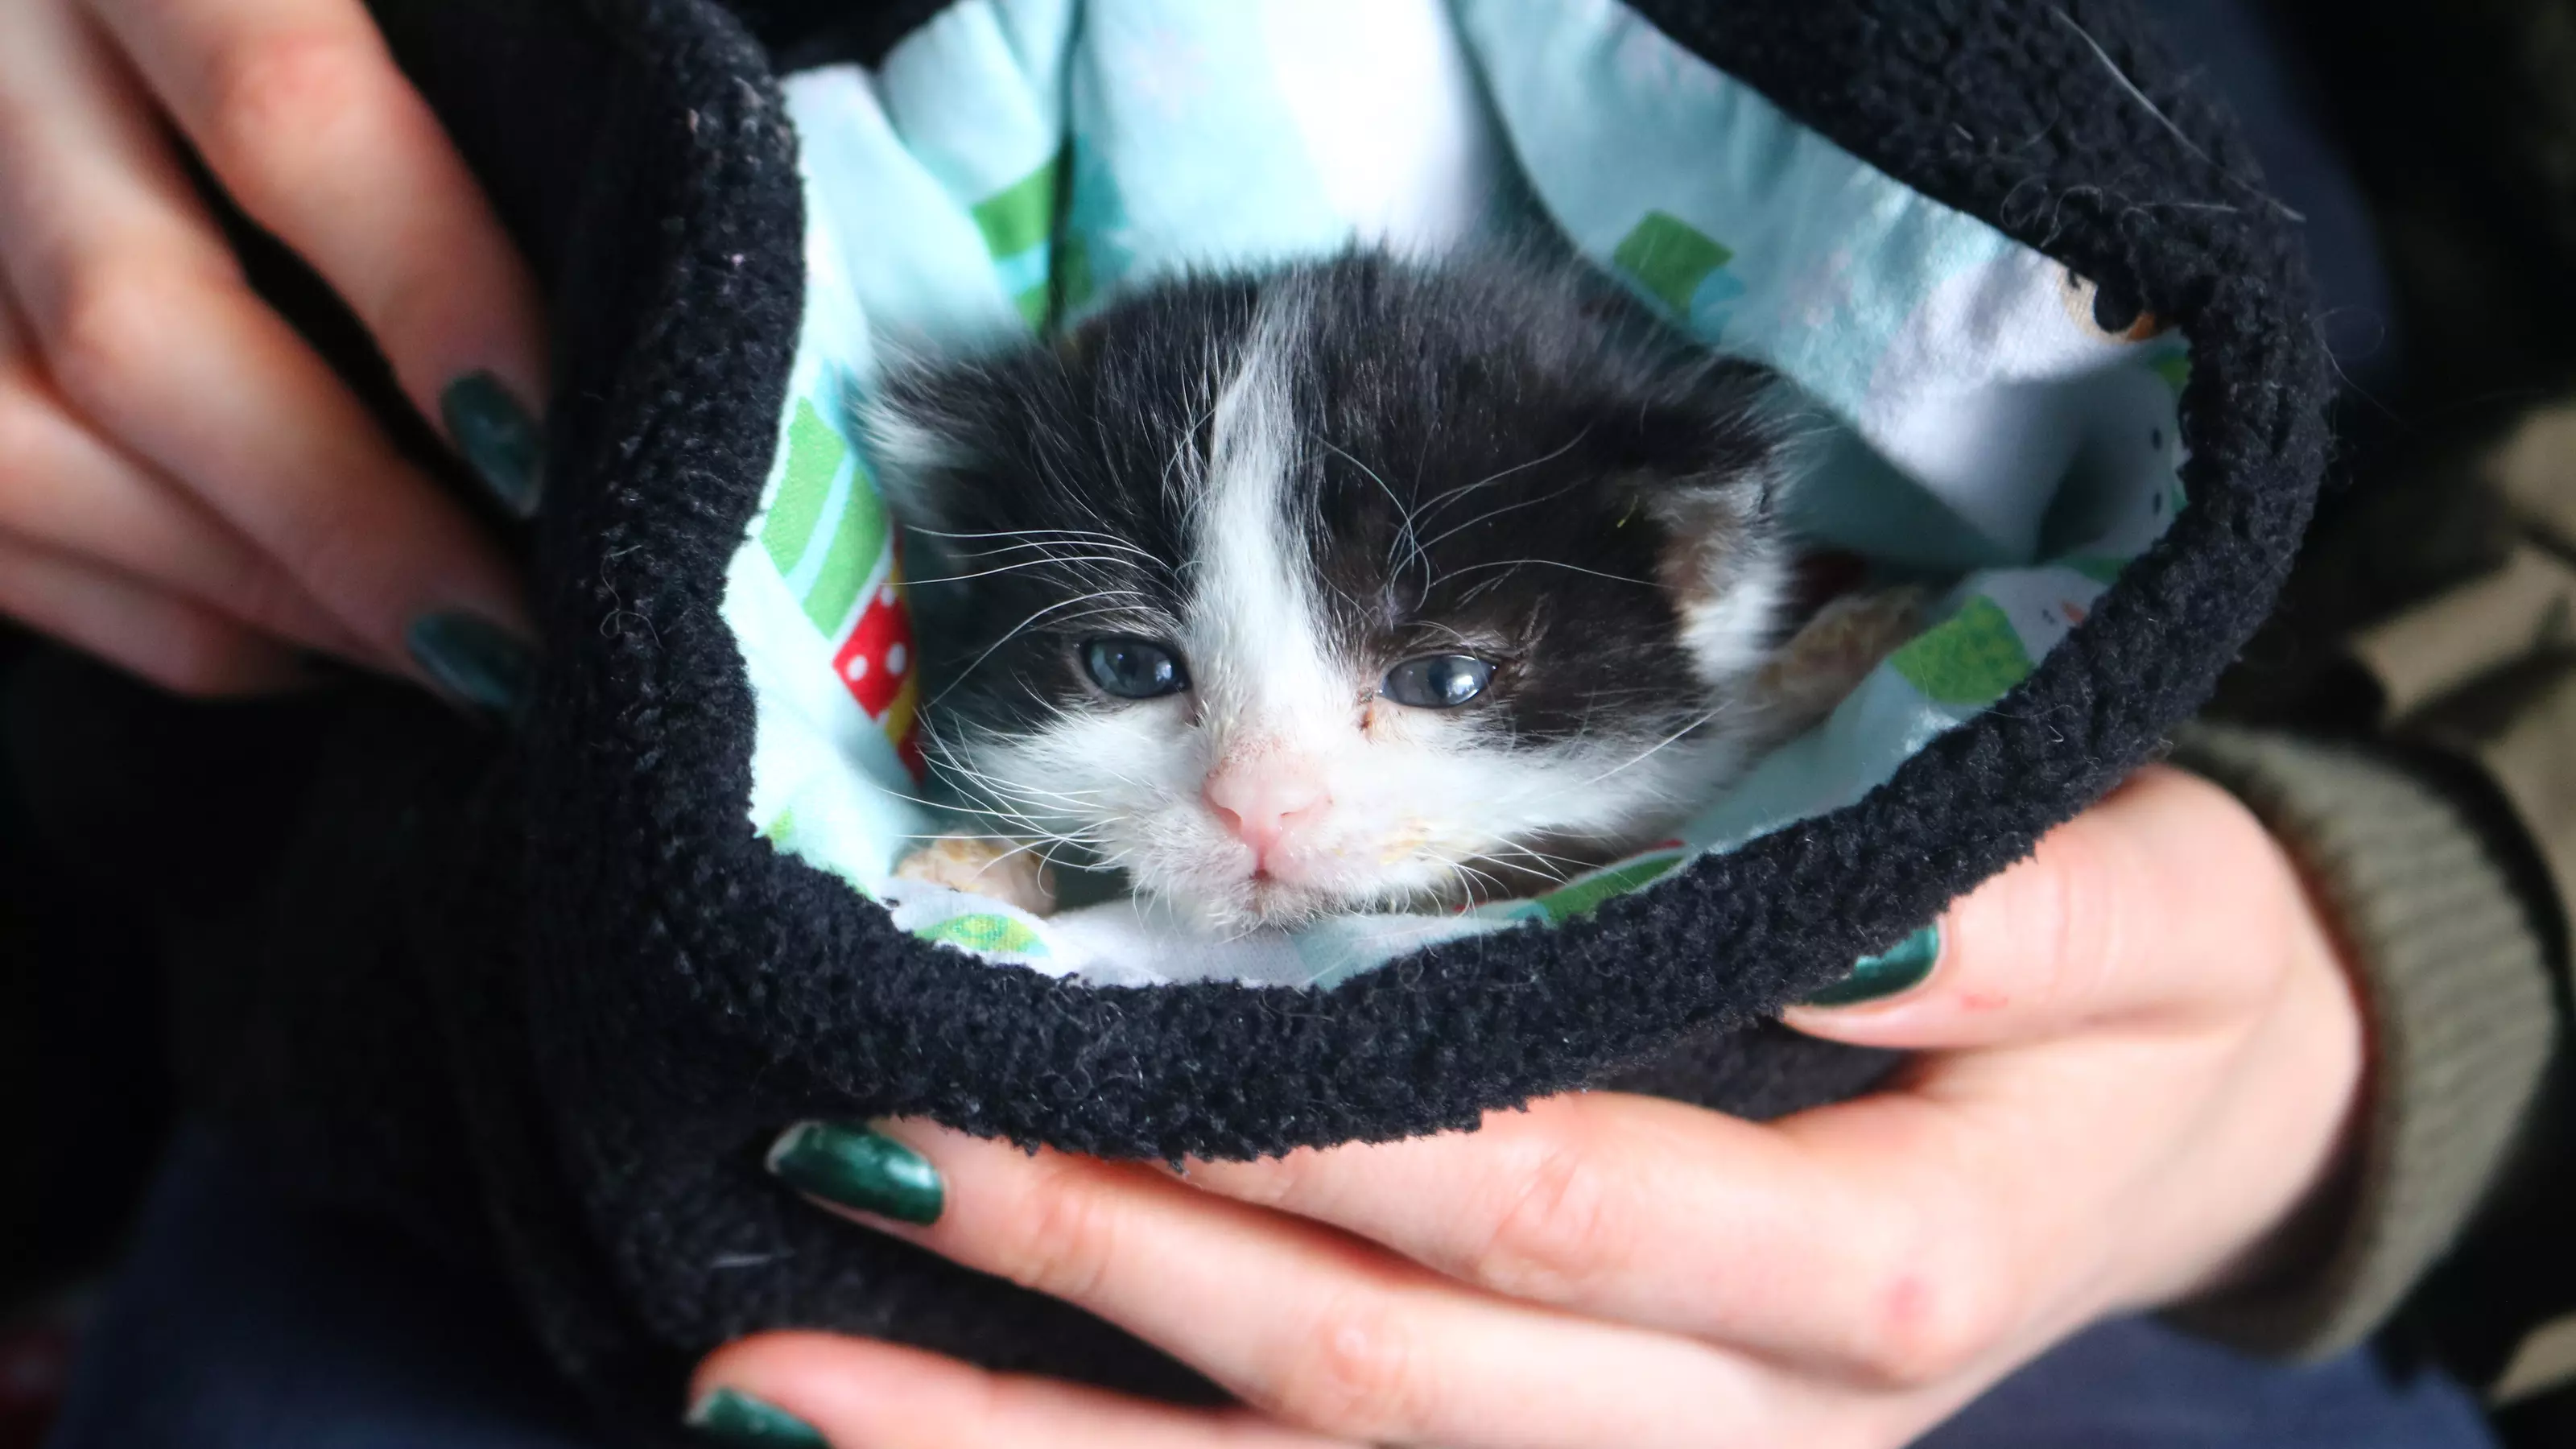 A black and white kitten being kept warm